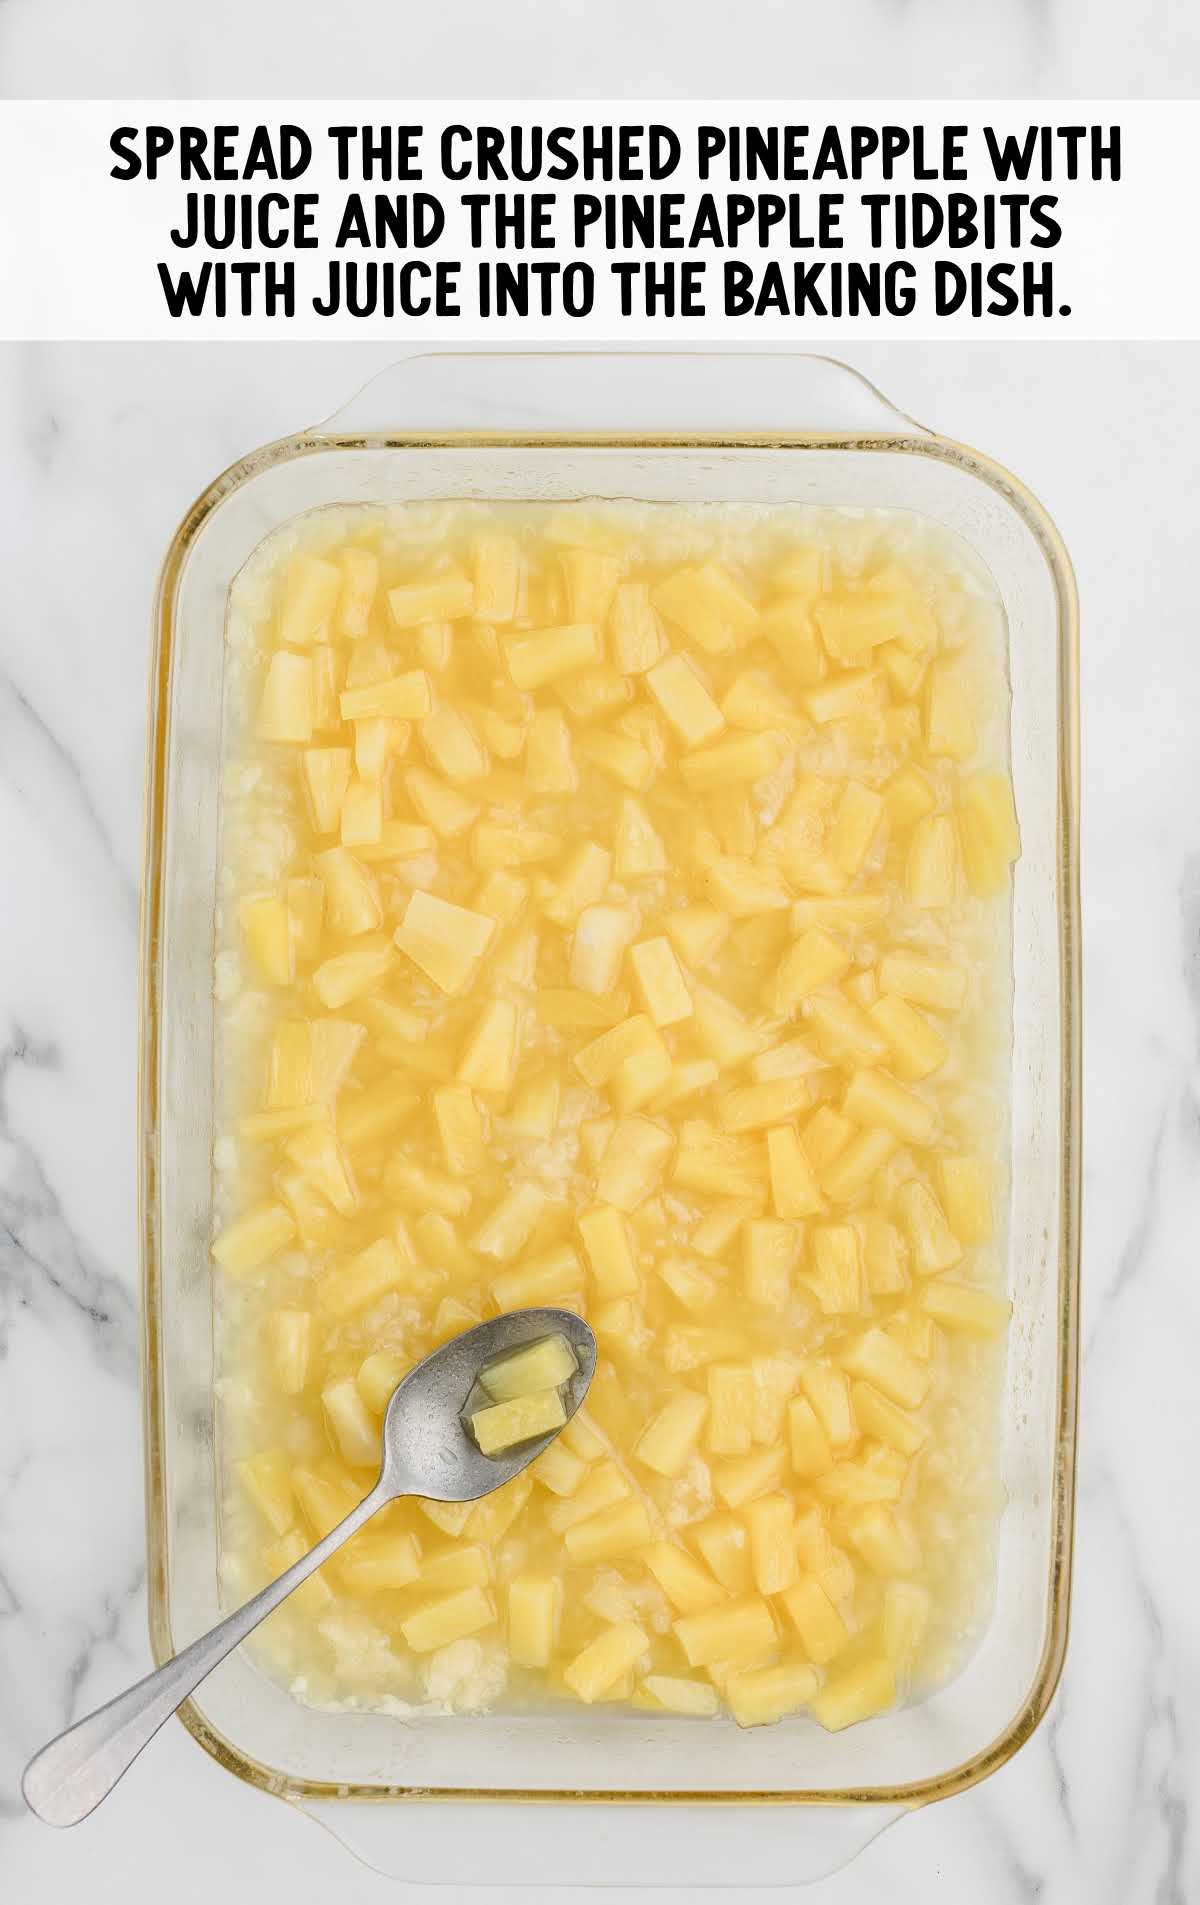 crushed pineapple spread with juice as well as pineapple tidbits with juice spread into a baking dish